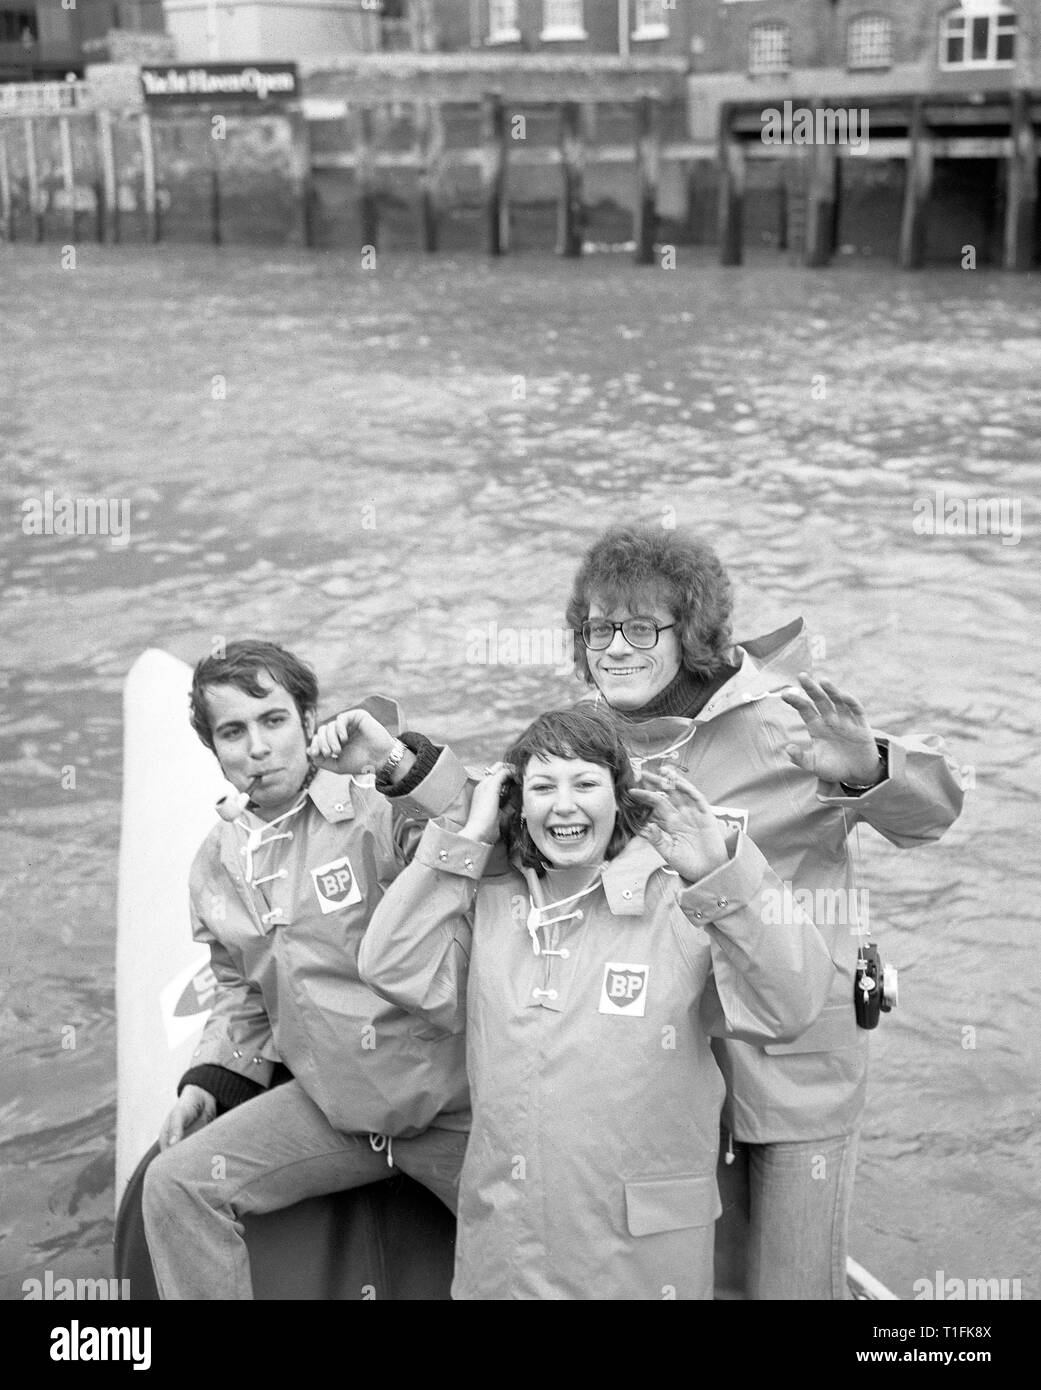 (L-R) Derek King, 24, Carol Maystone and Peter Bird, 26, in their oilskins in London. They are set to attempt to row round the world in Britannia II , the Uffa Fox designed boat that John Fairfax and Sylvia Cook rowed across the Pacific in 1972. The team will start their attempt from Gibraltar later this month. Stock Photo